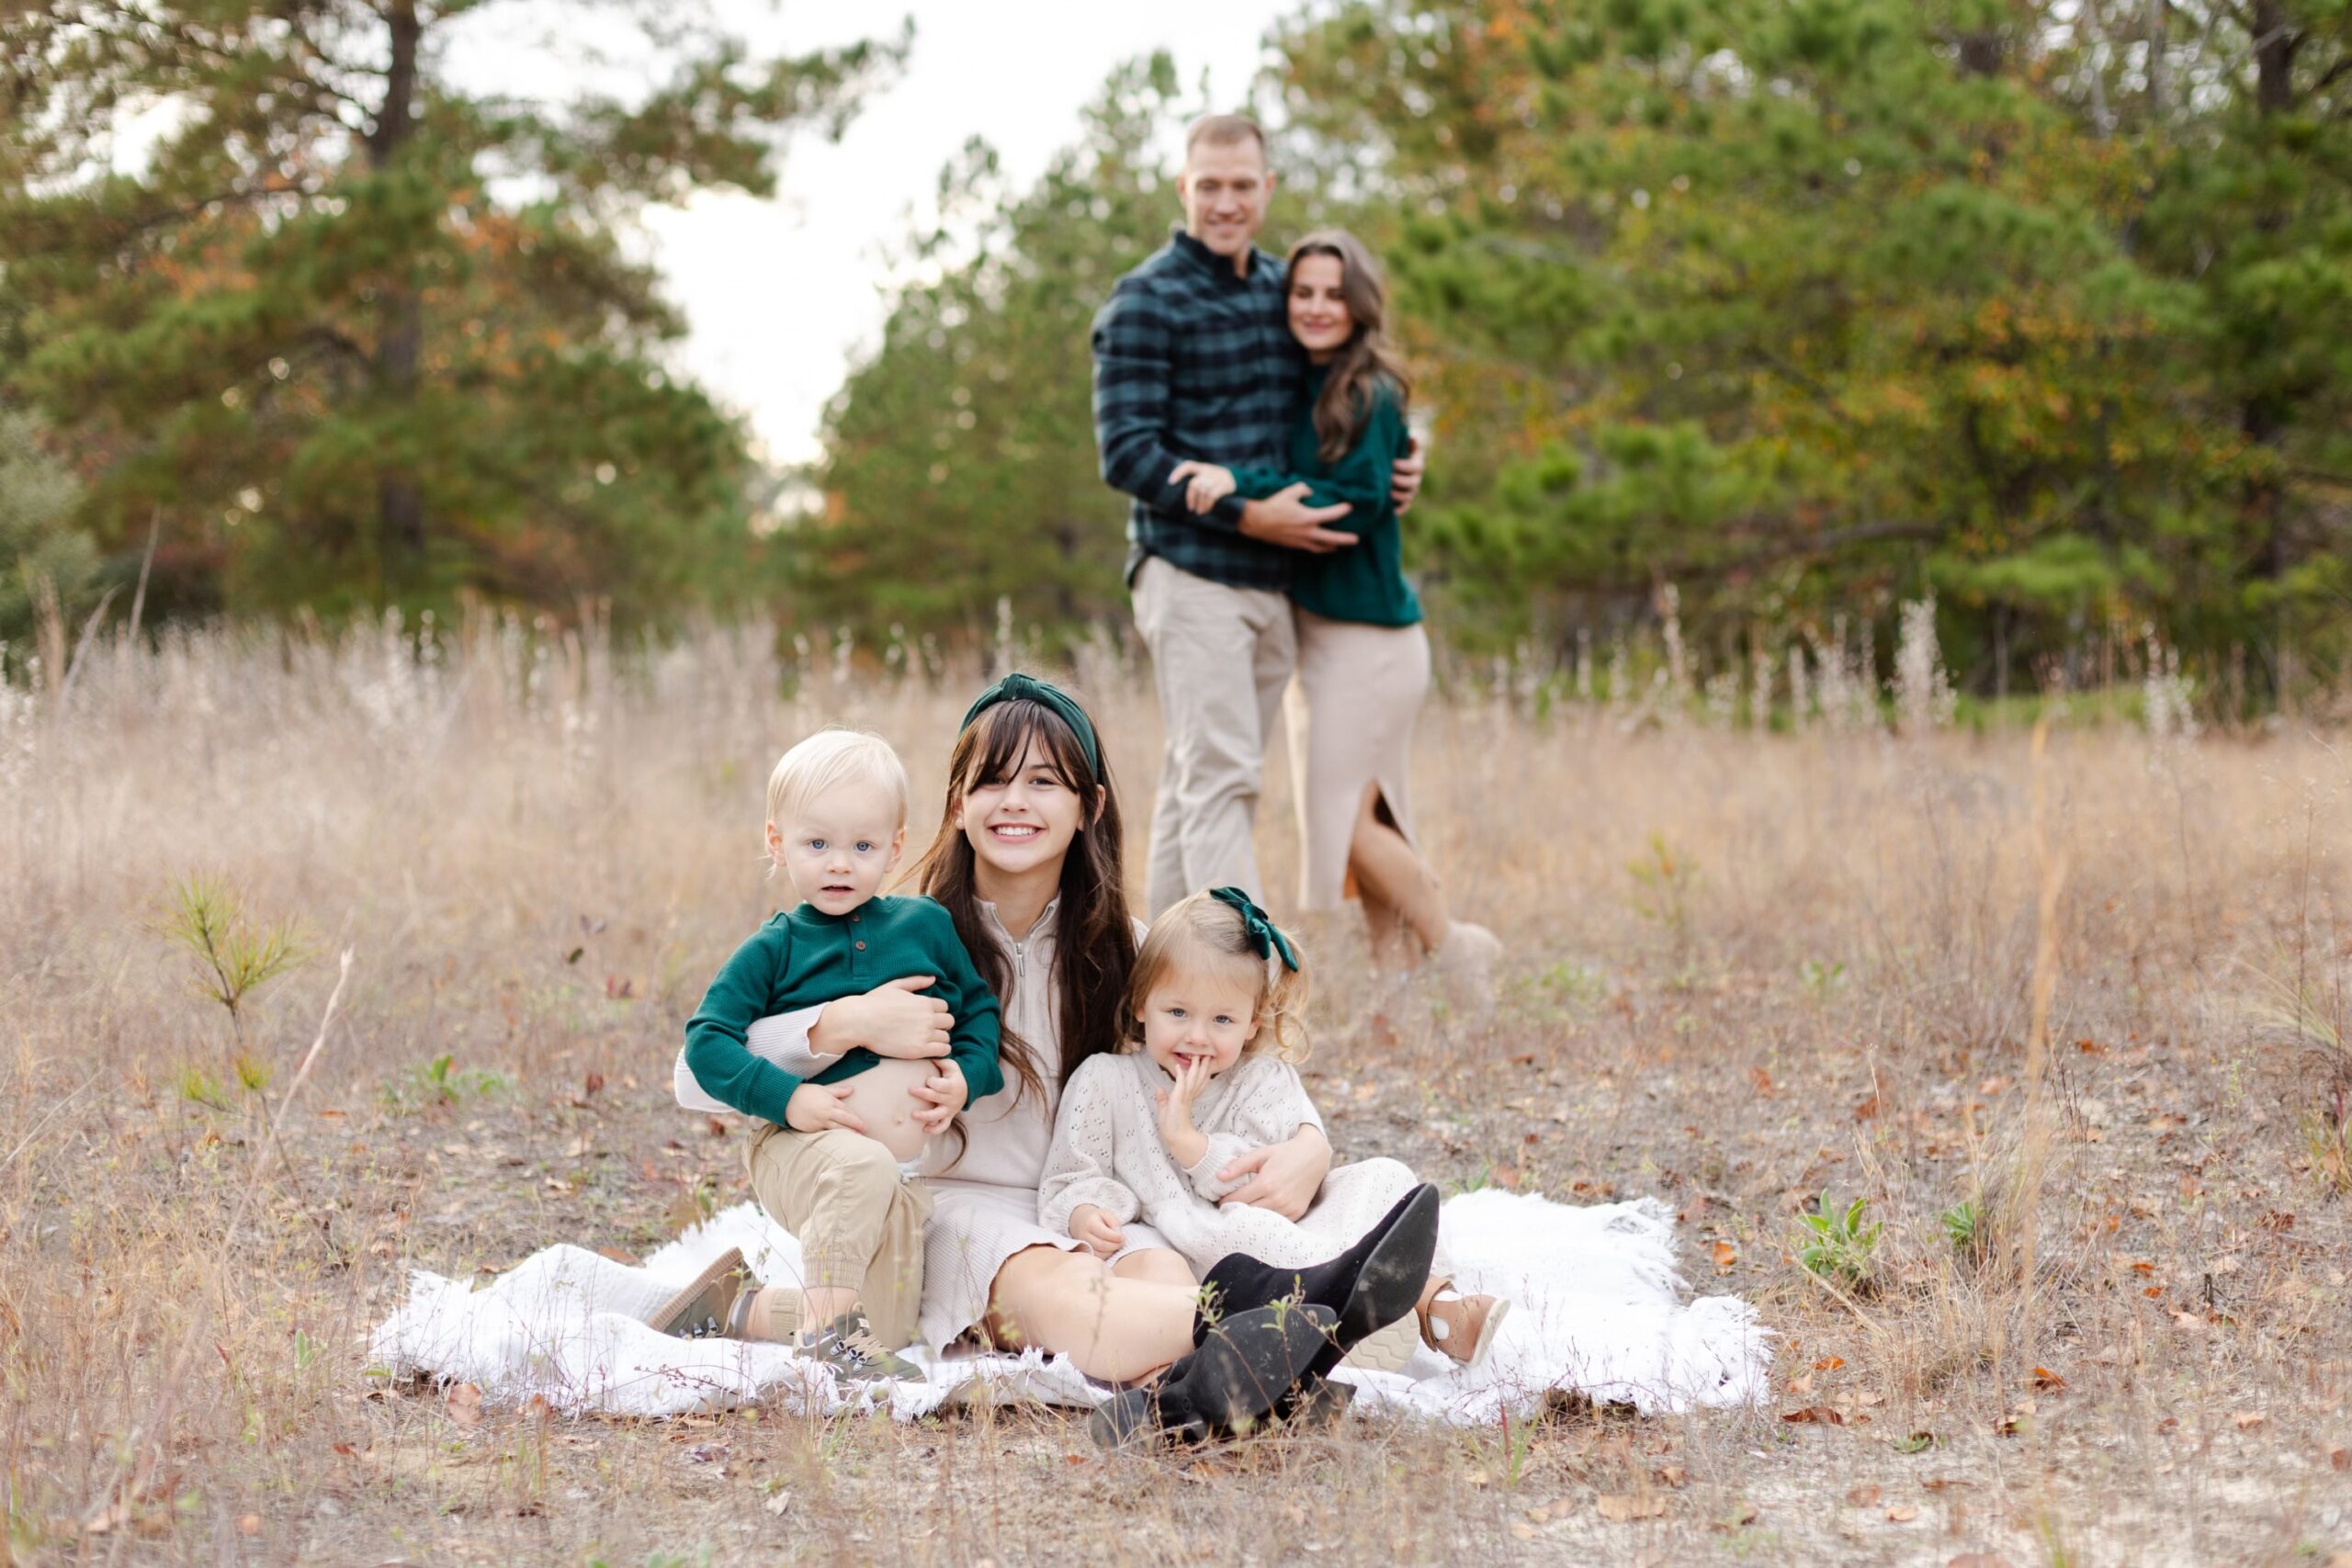 Dr. Robert Gildner's children smiling together for a photo in a serene woodland setting.